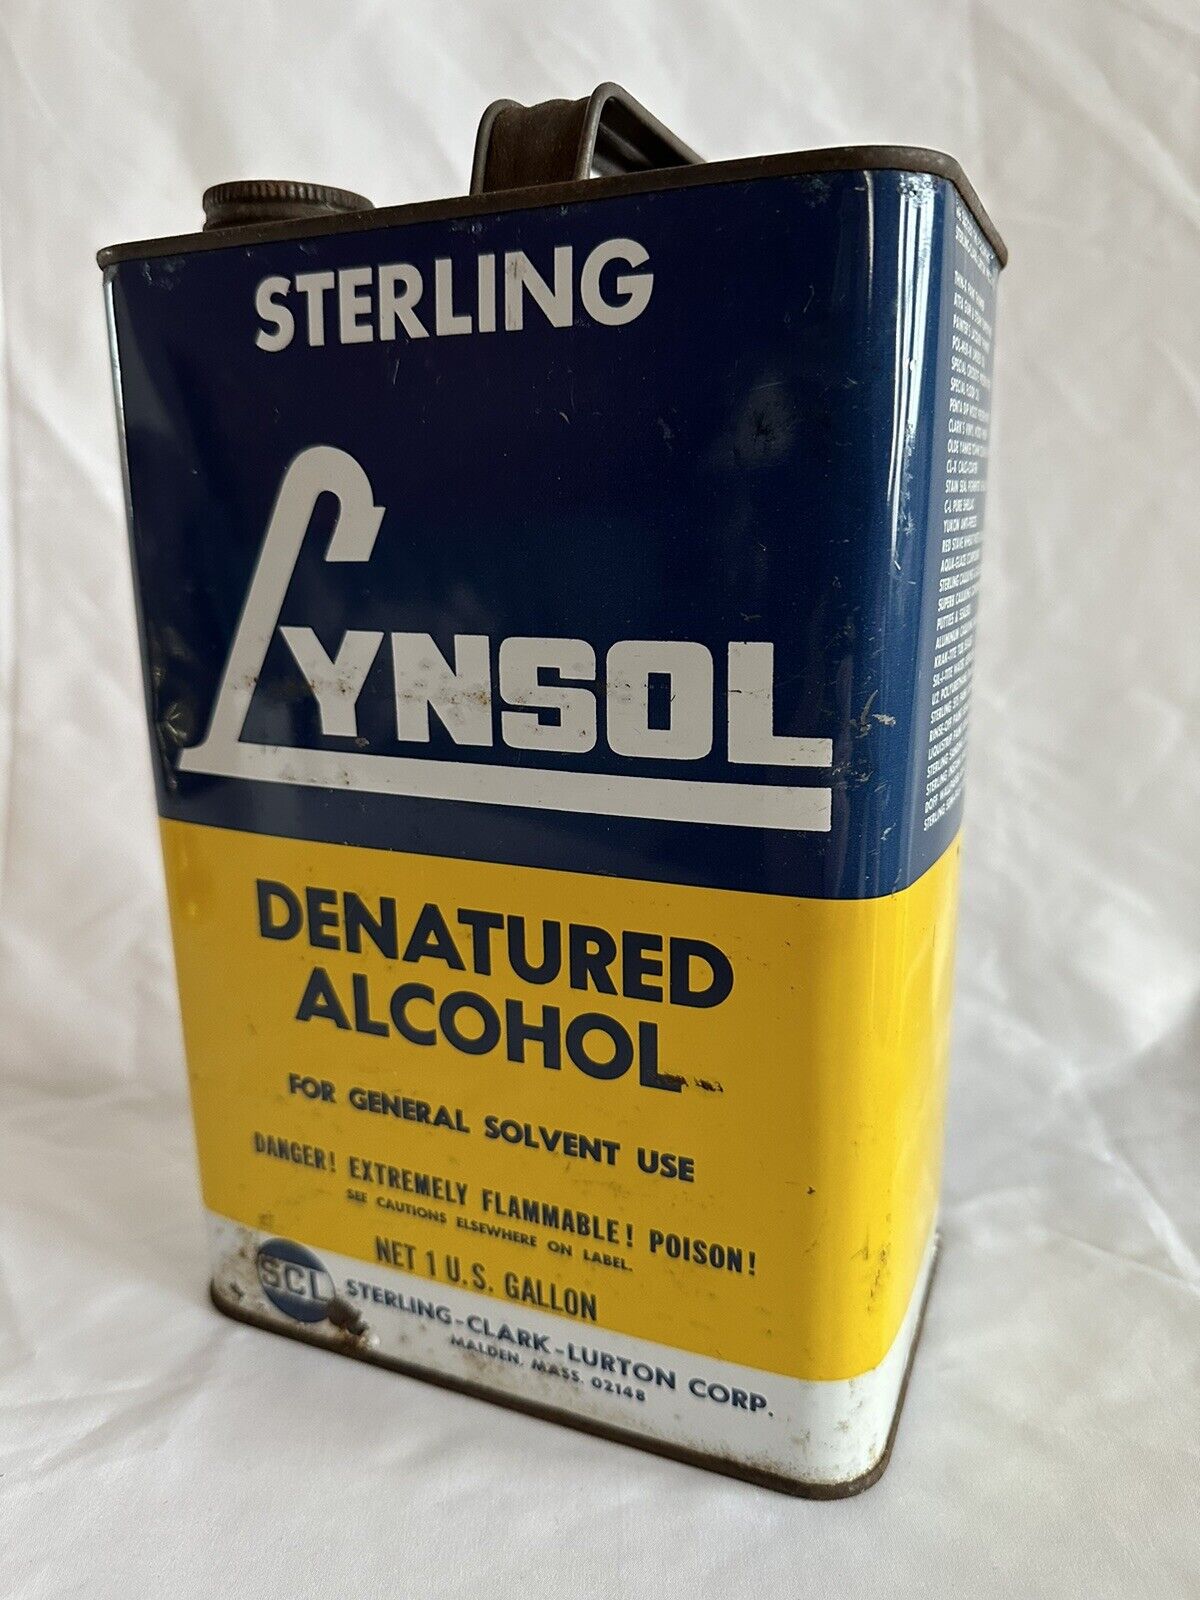 Vintage Sterling Lynsol Denatured Alcohol Empty Tin Can 1 Gallon with Cap EMPTY